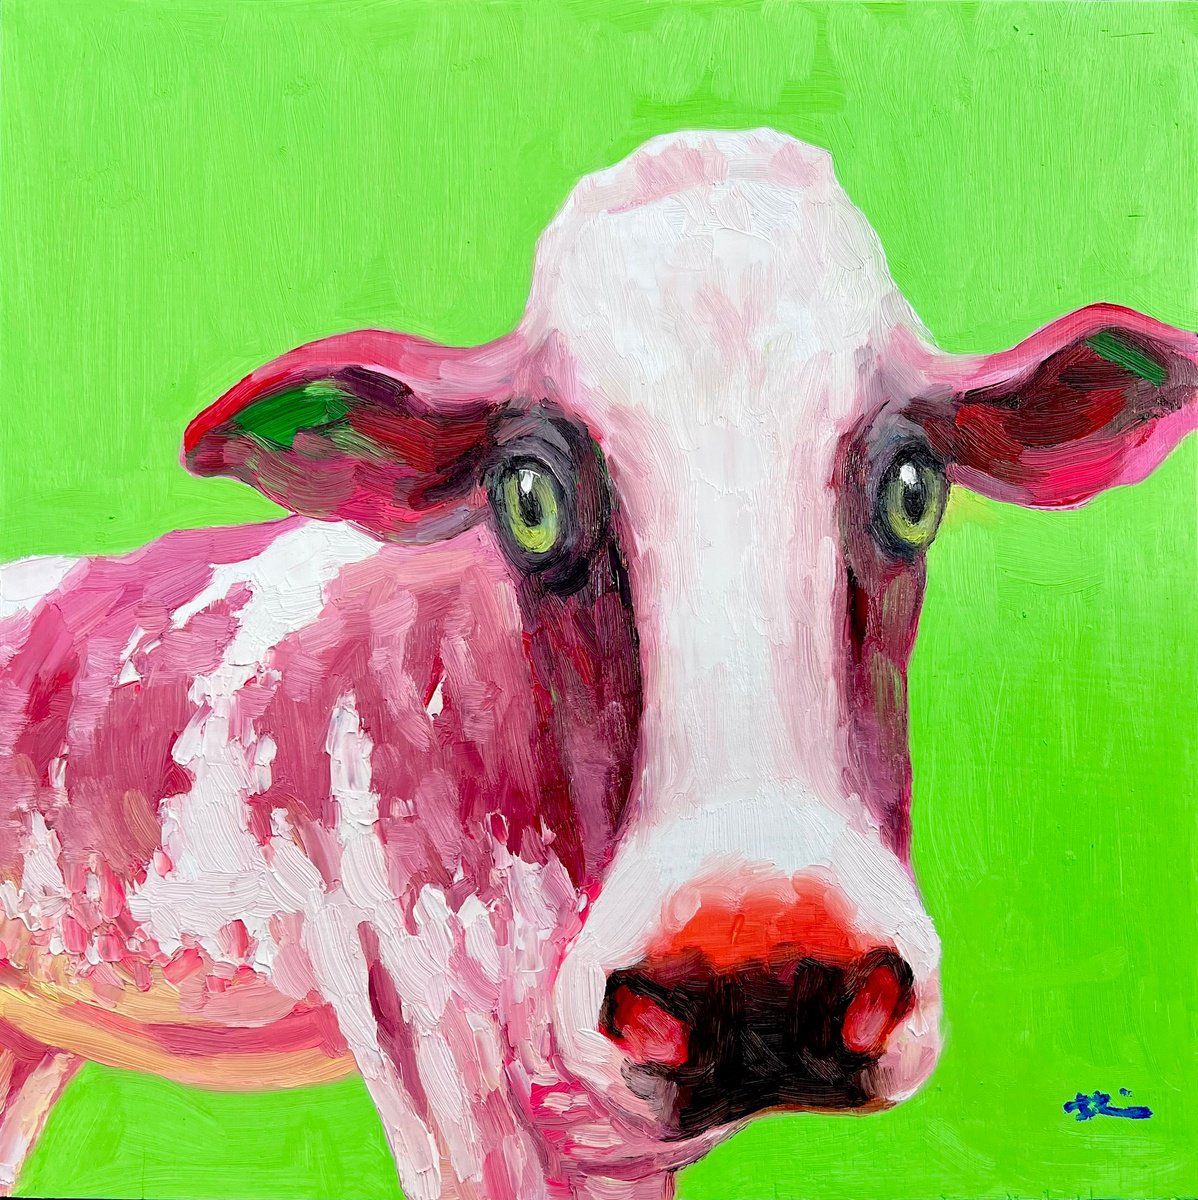 Pop Art -? Cow in Green by Dong Lin Zhang